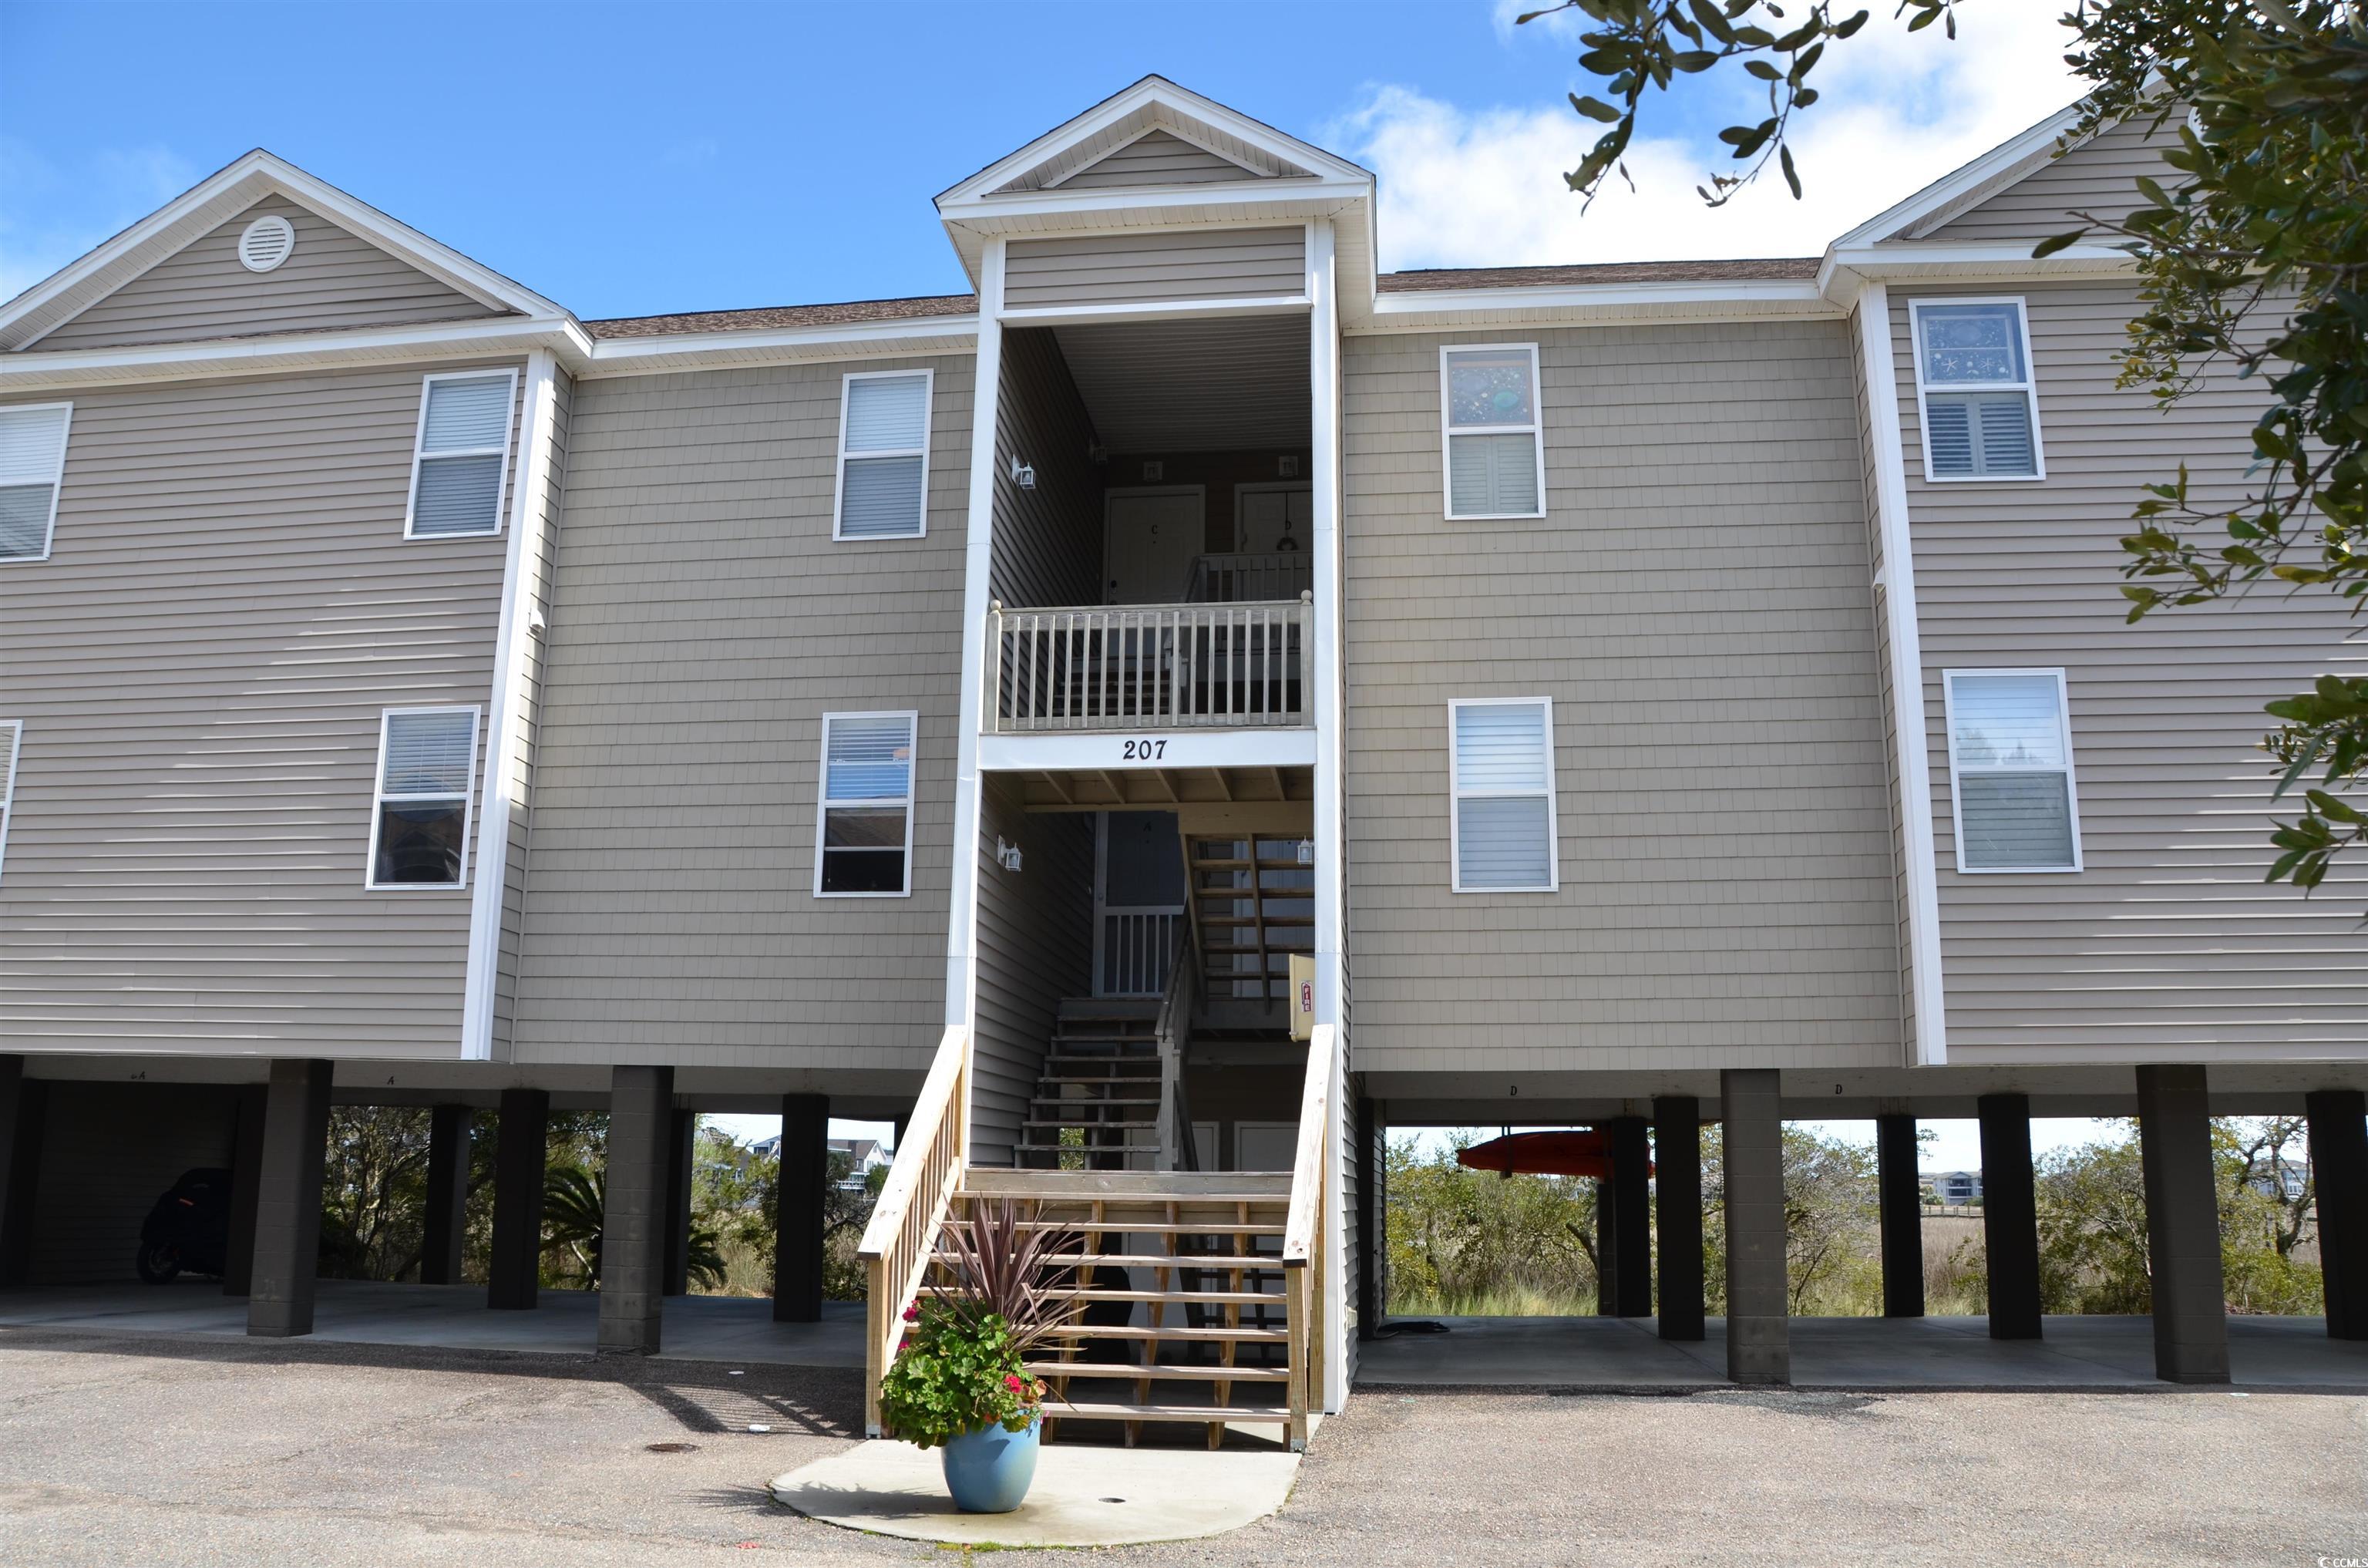 207 South Cove Place Dr., Pawleys Island, SC 29585